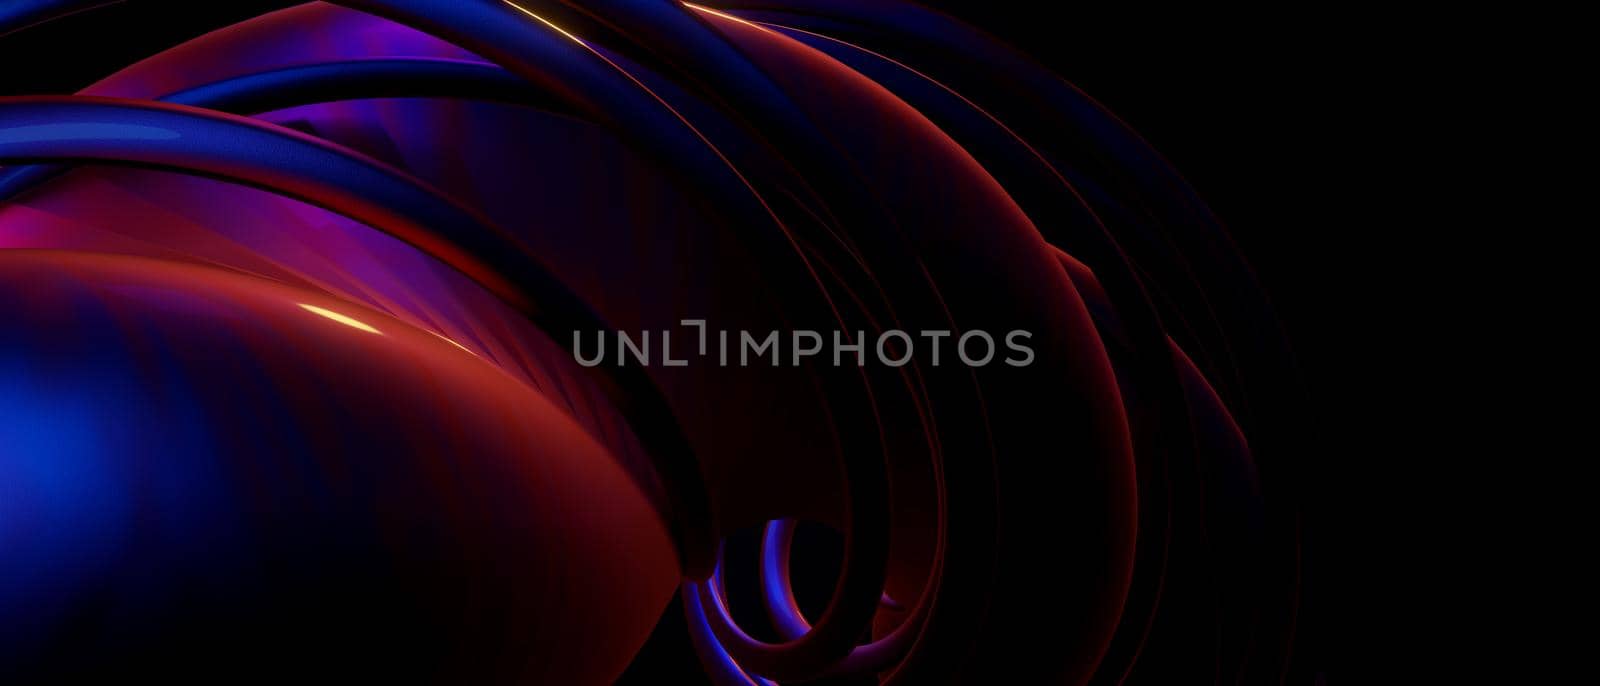 Imaginative Abstract Shapes Irridescent BluePurple Banner Background 3D Render by yay_lmrb